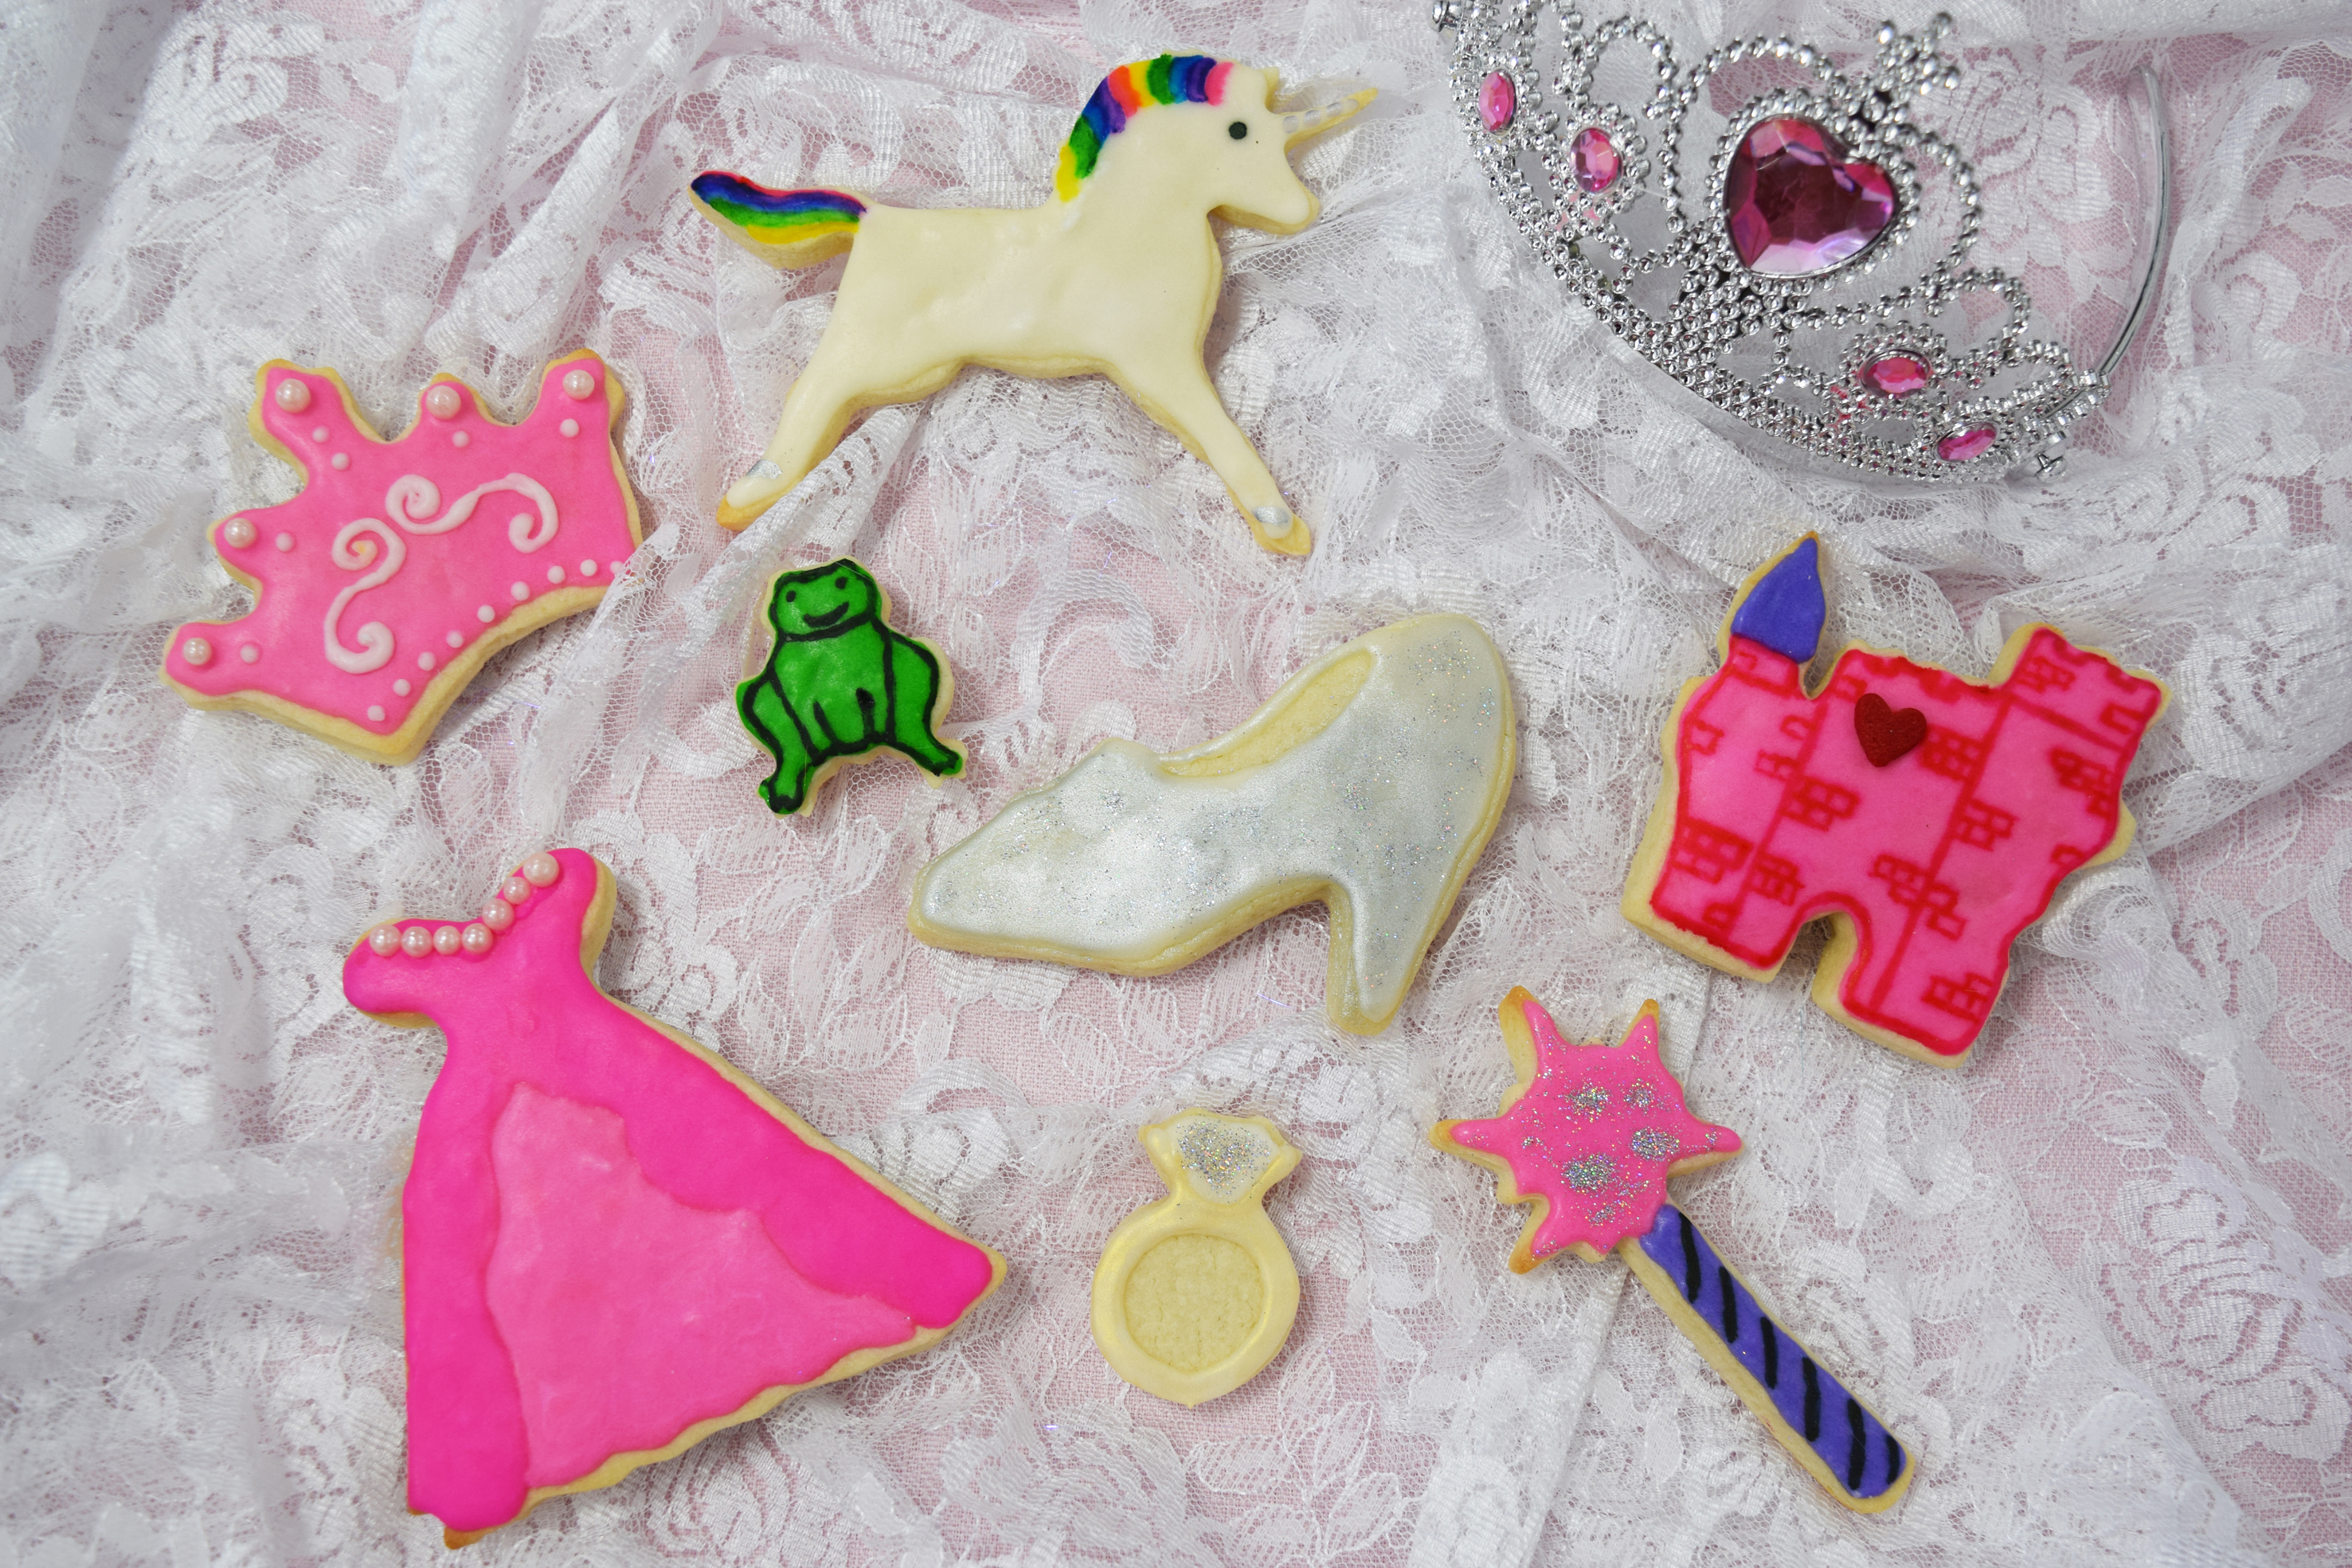 Little Princess Cake Decorating kit, 8 cutters from 3.8 to 11.4 cm